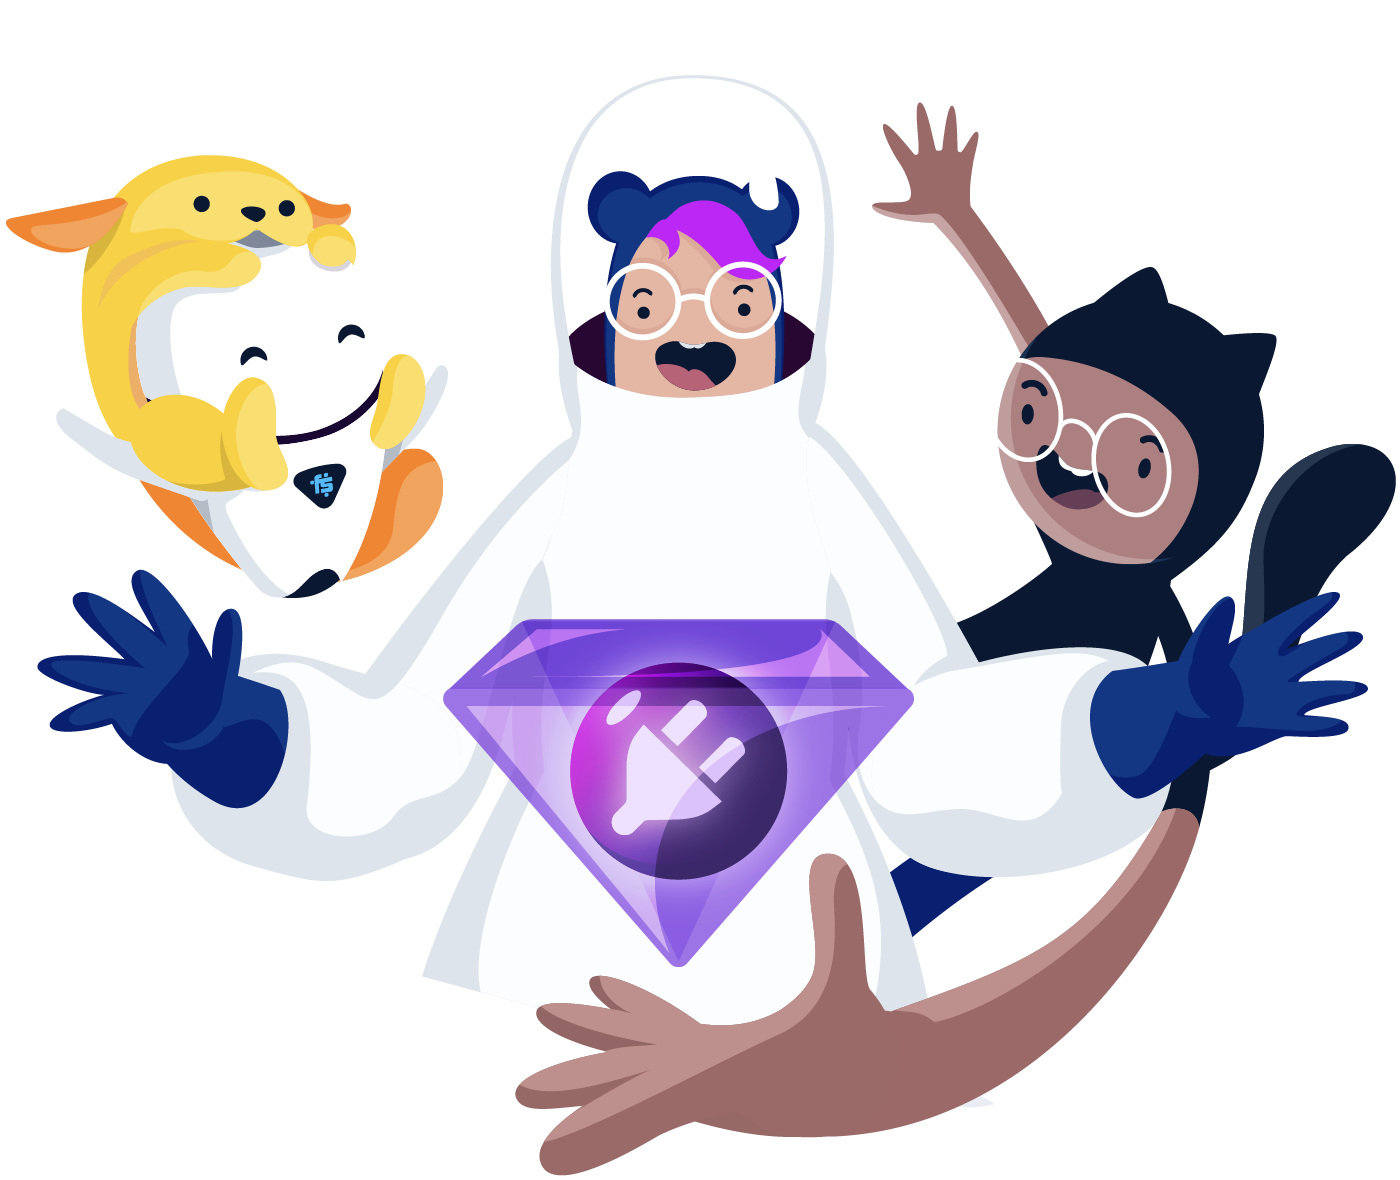 a group of people in space suits, one holding a purple gem in their hand